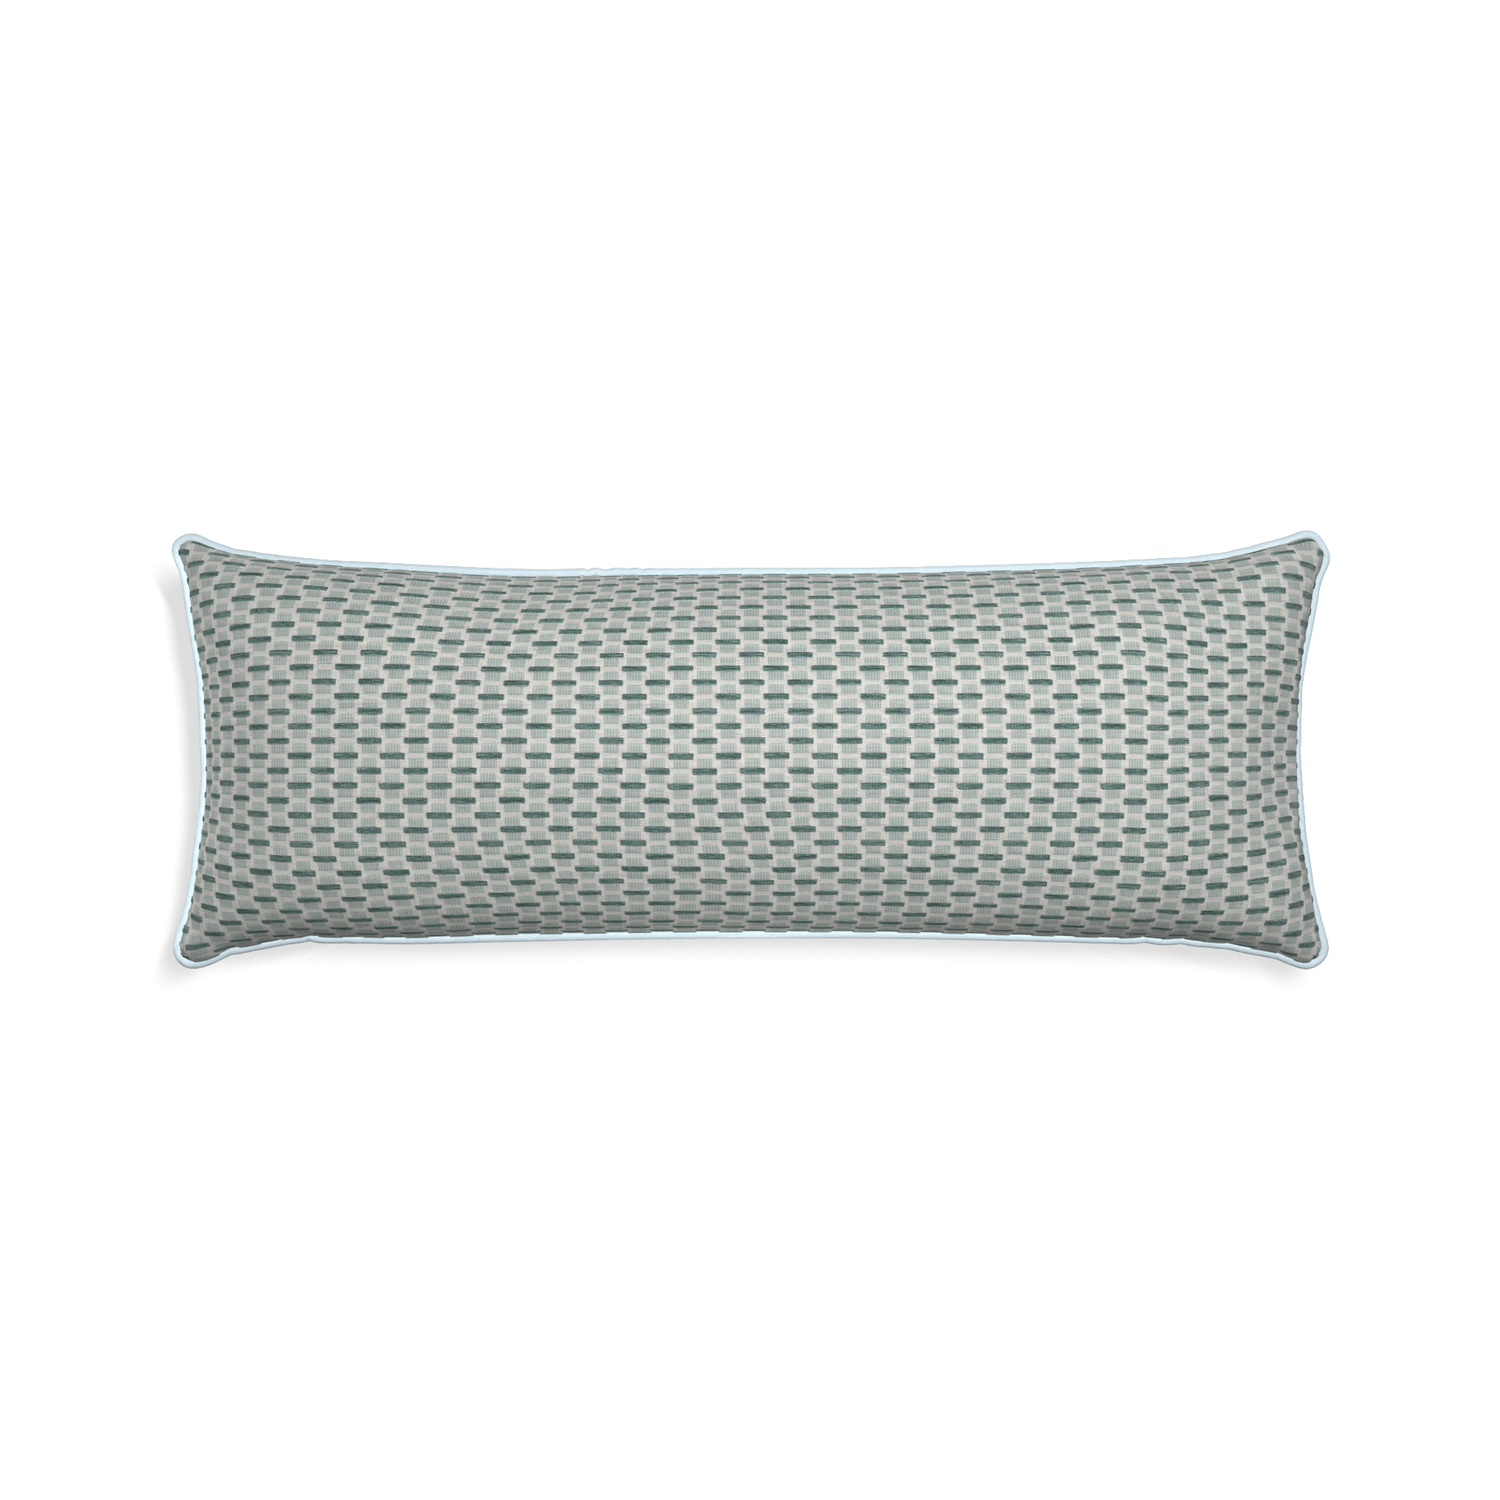 Xl-lumbar willow mint custom green geometric chenillepillow with powder piping on white background